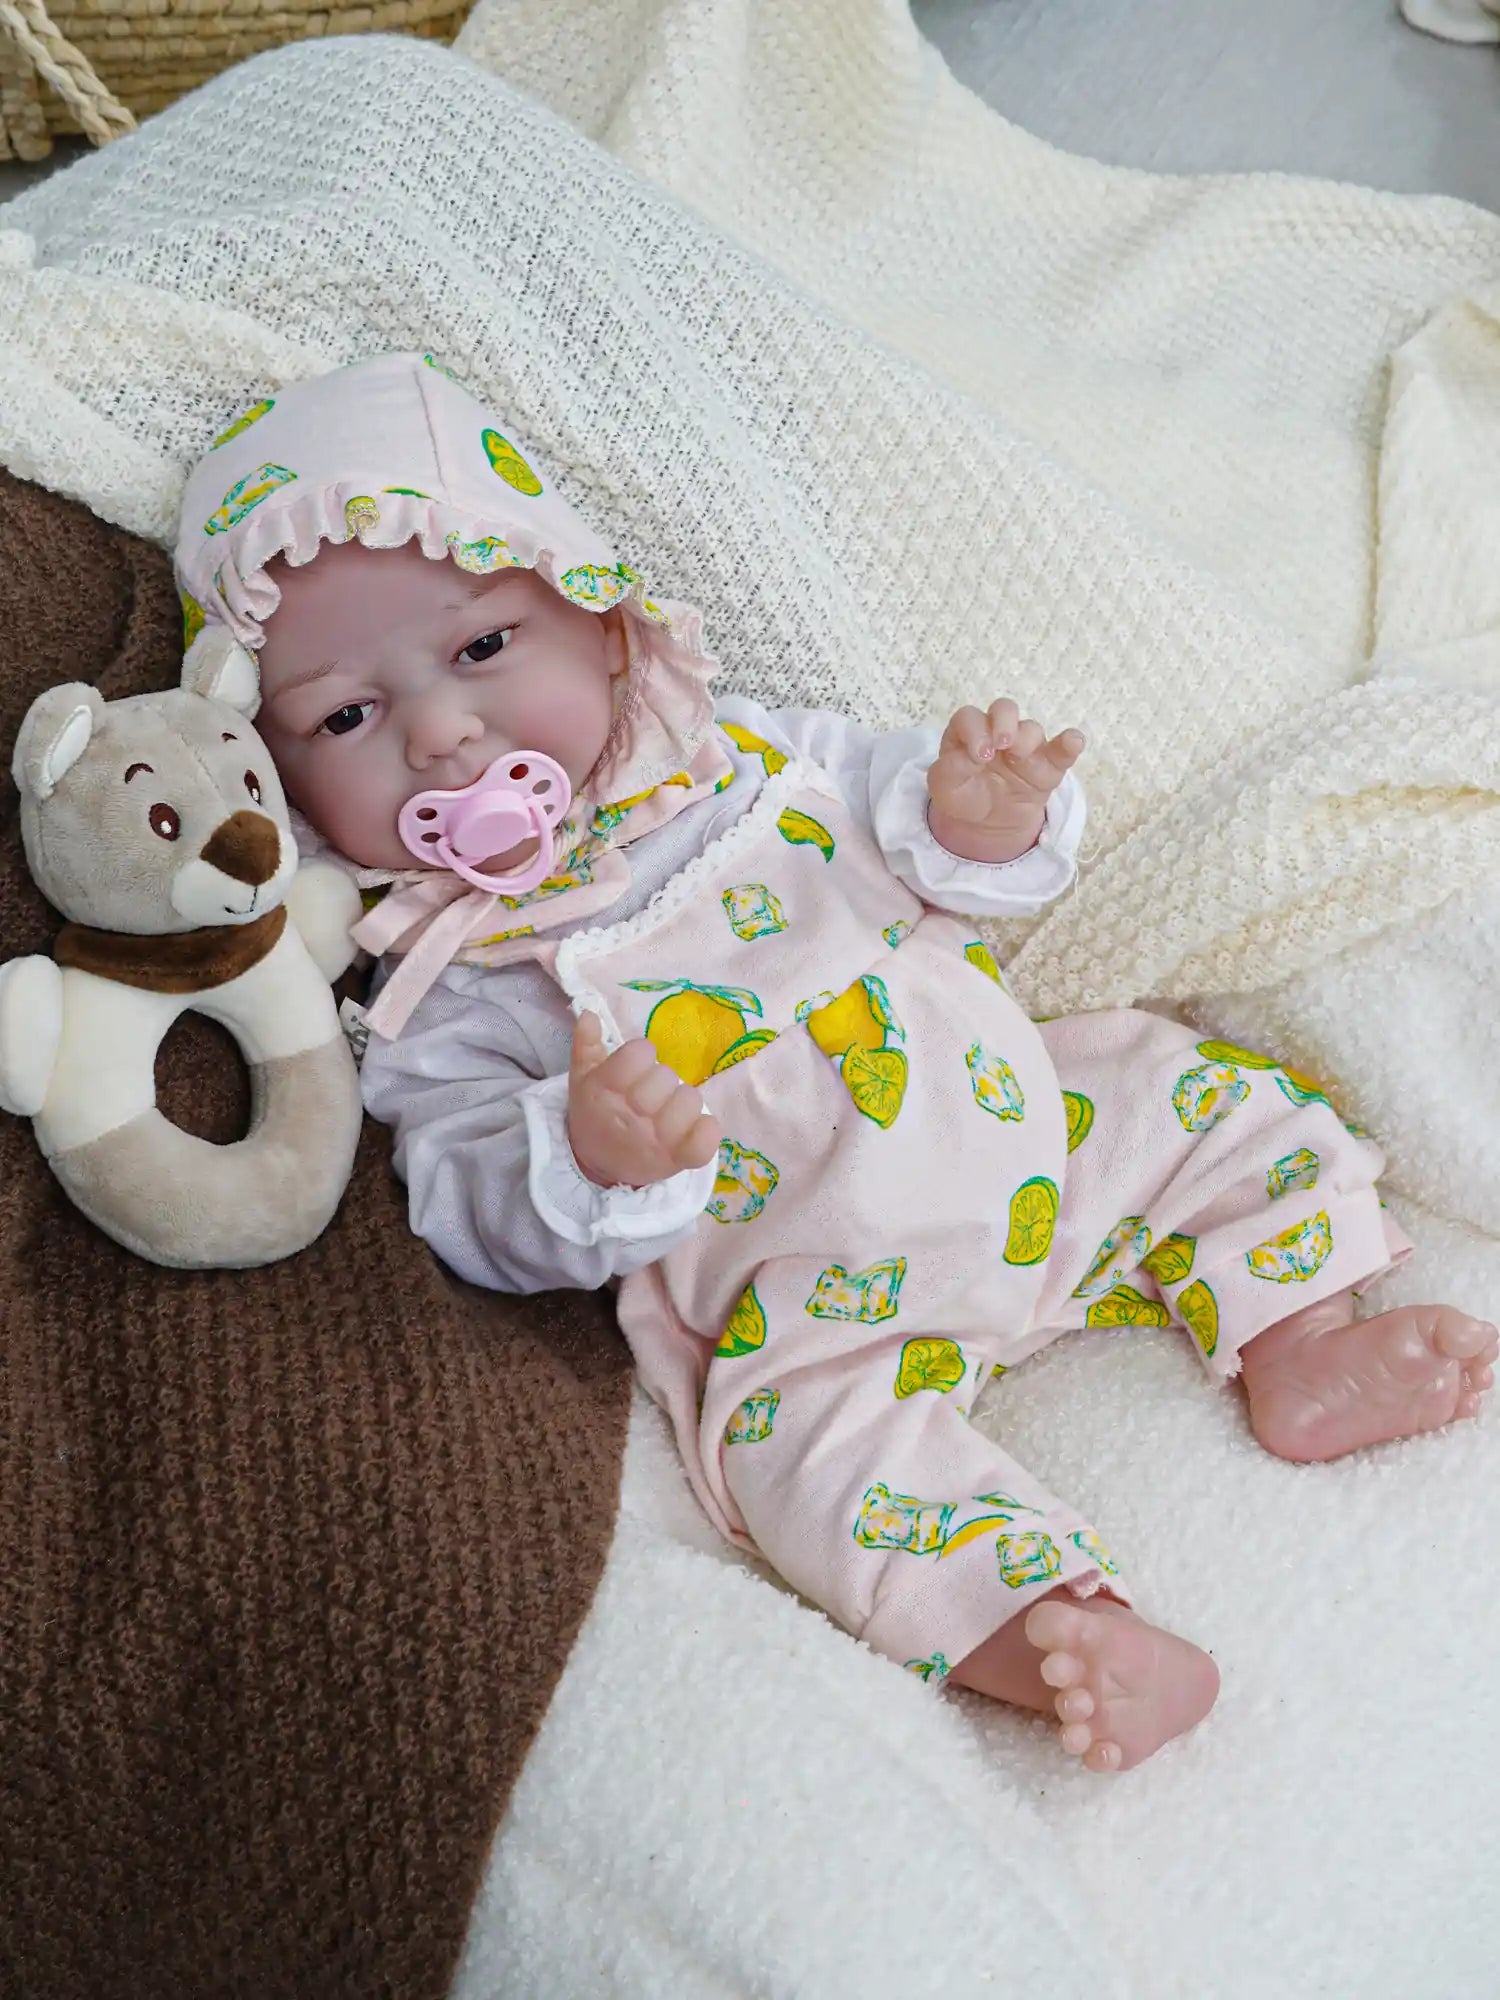 Cute reborn baby doll with pink pacifier lying on sofa